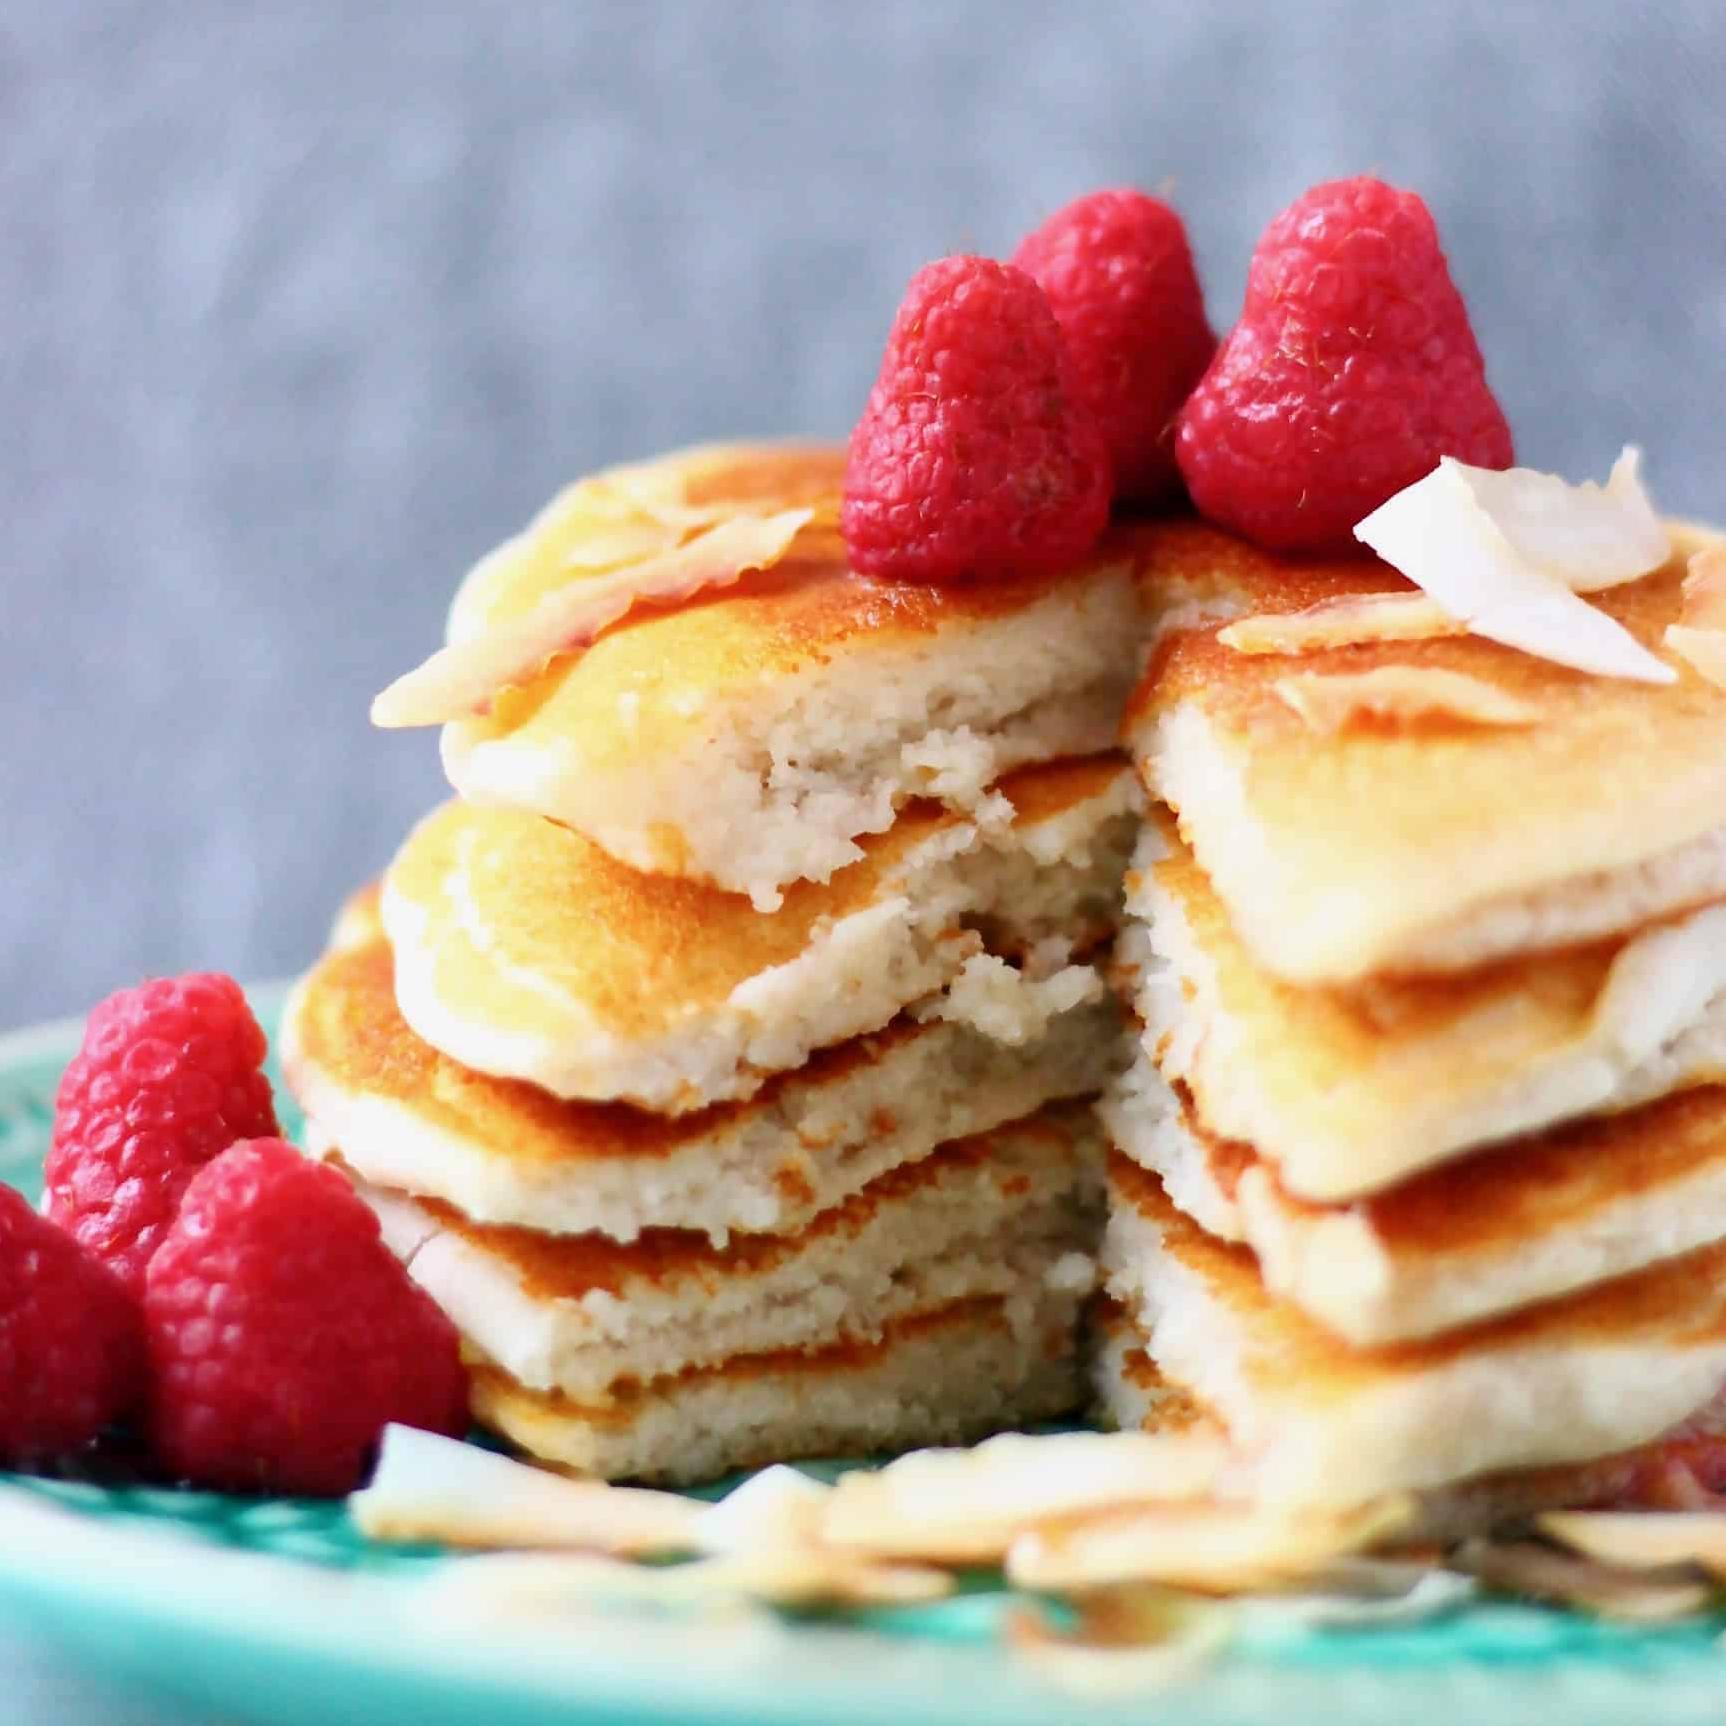  Fluffy coconut pancakes that are gluten-free